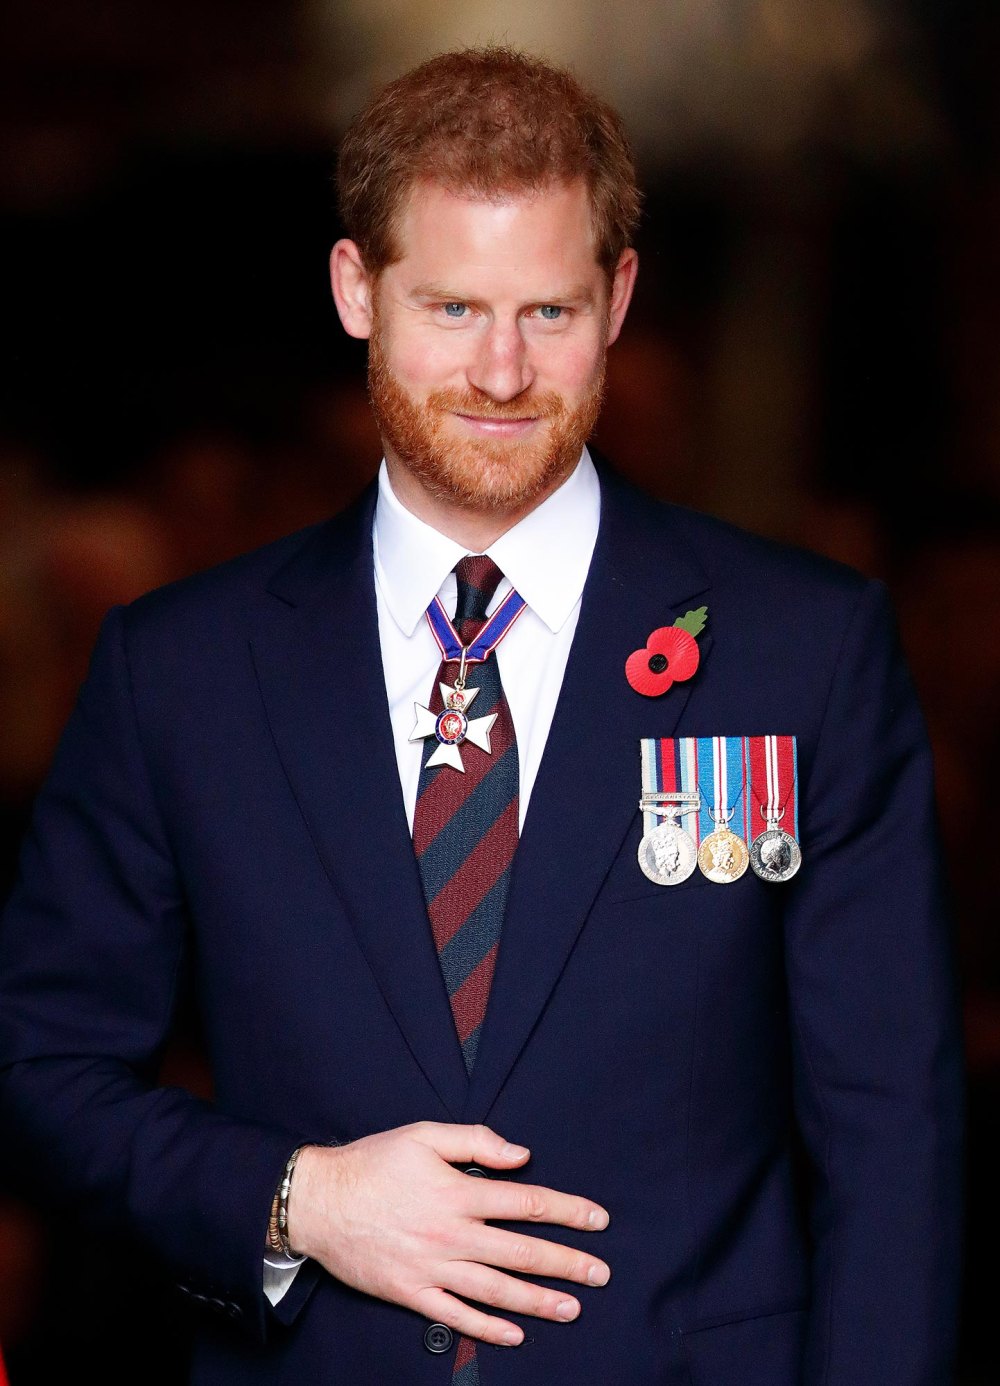 Prince Harry Will Be Inducted Into Living Legends of Aviation for His Time as a Military Helicopter Pilot